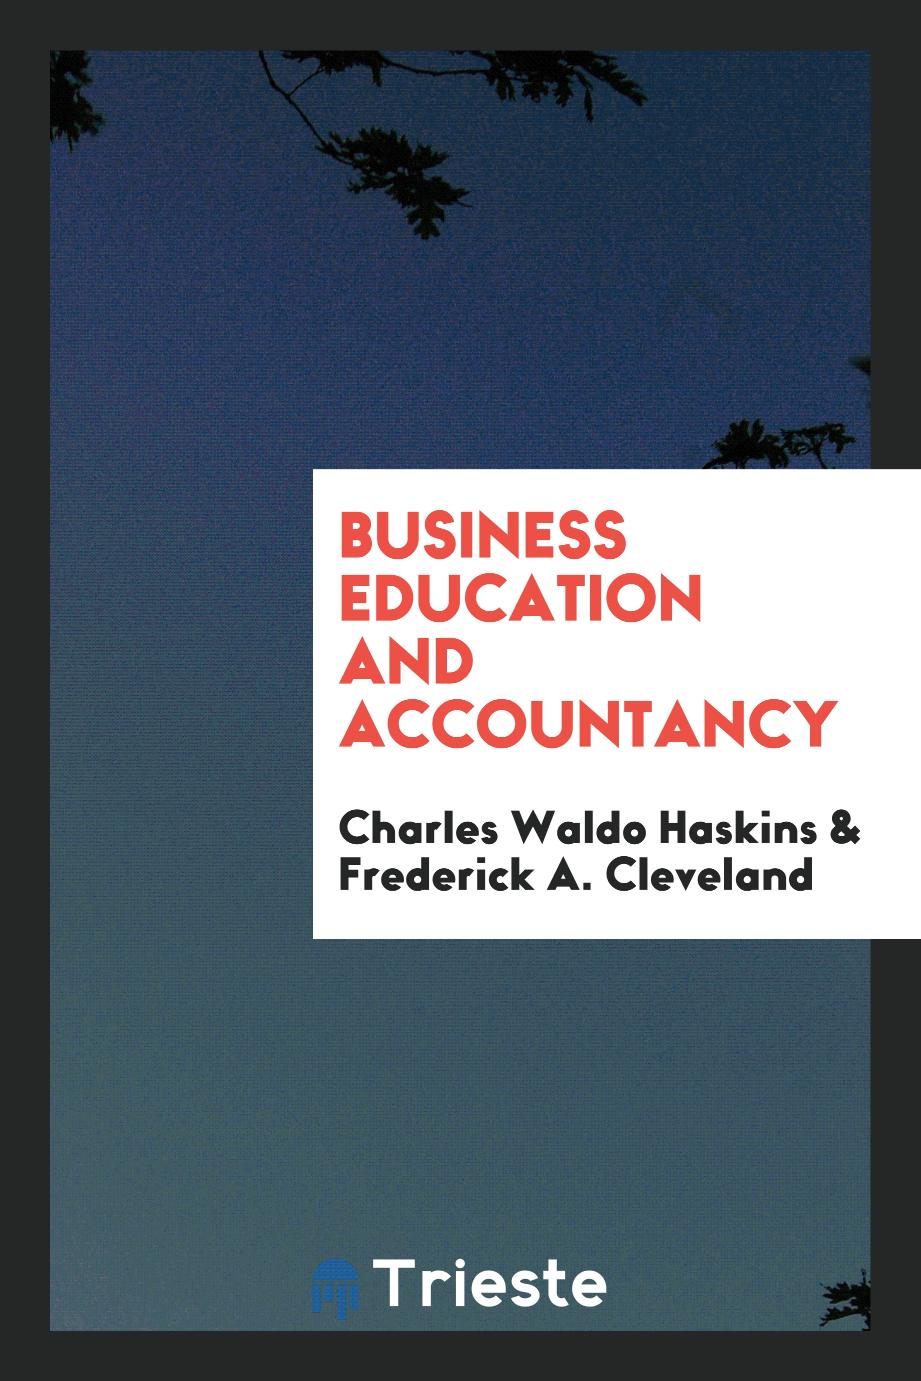 Business education and accountancy